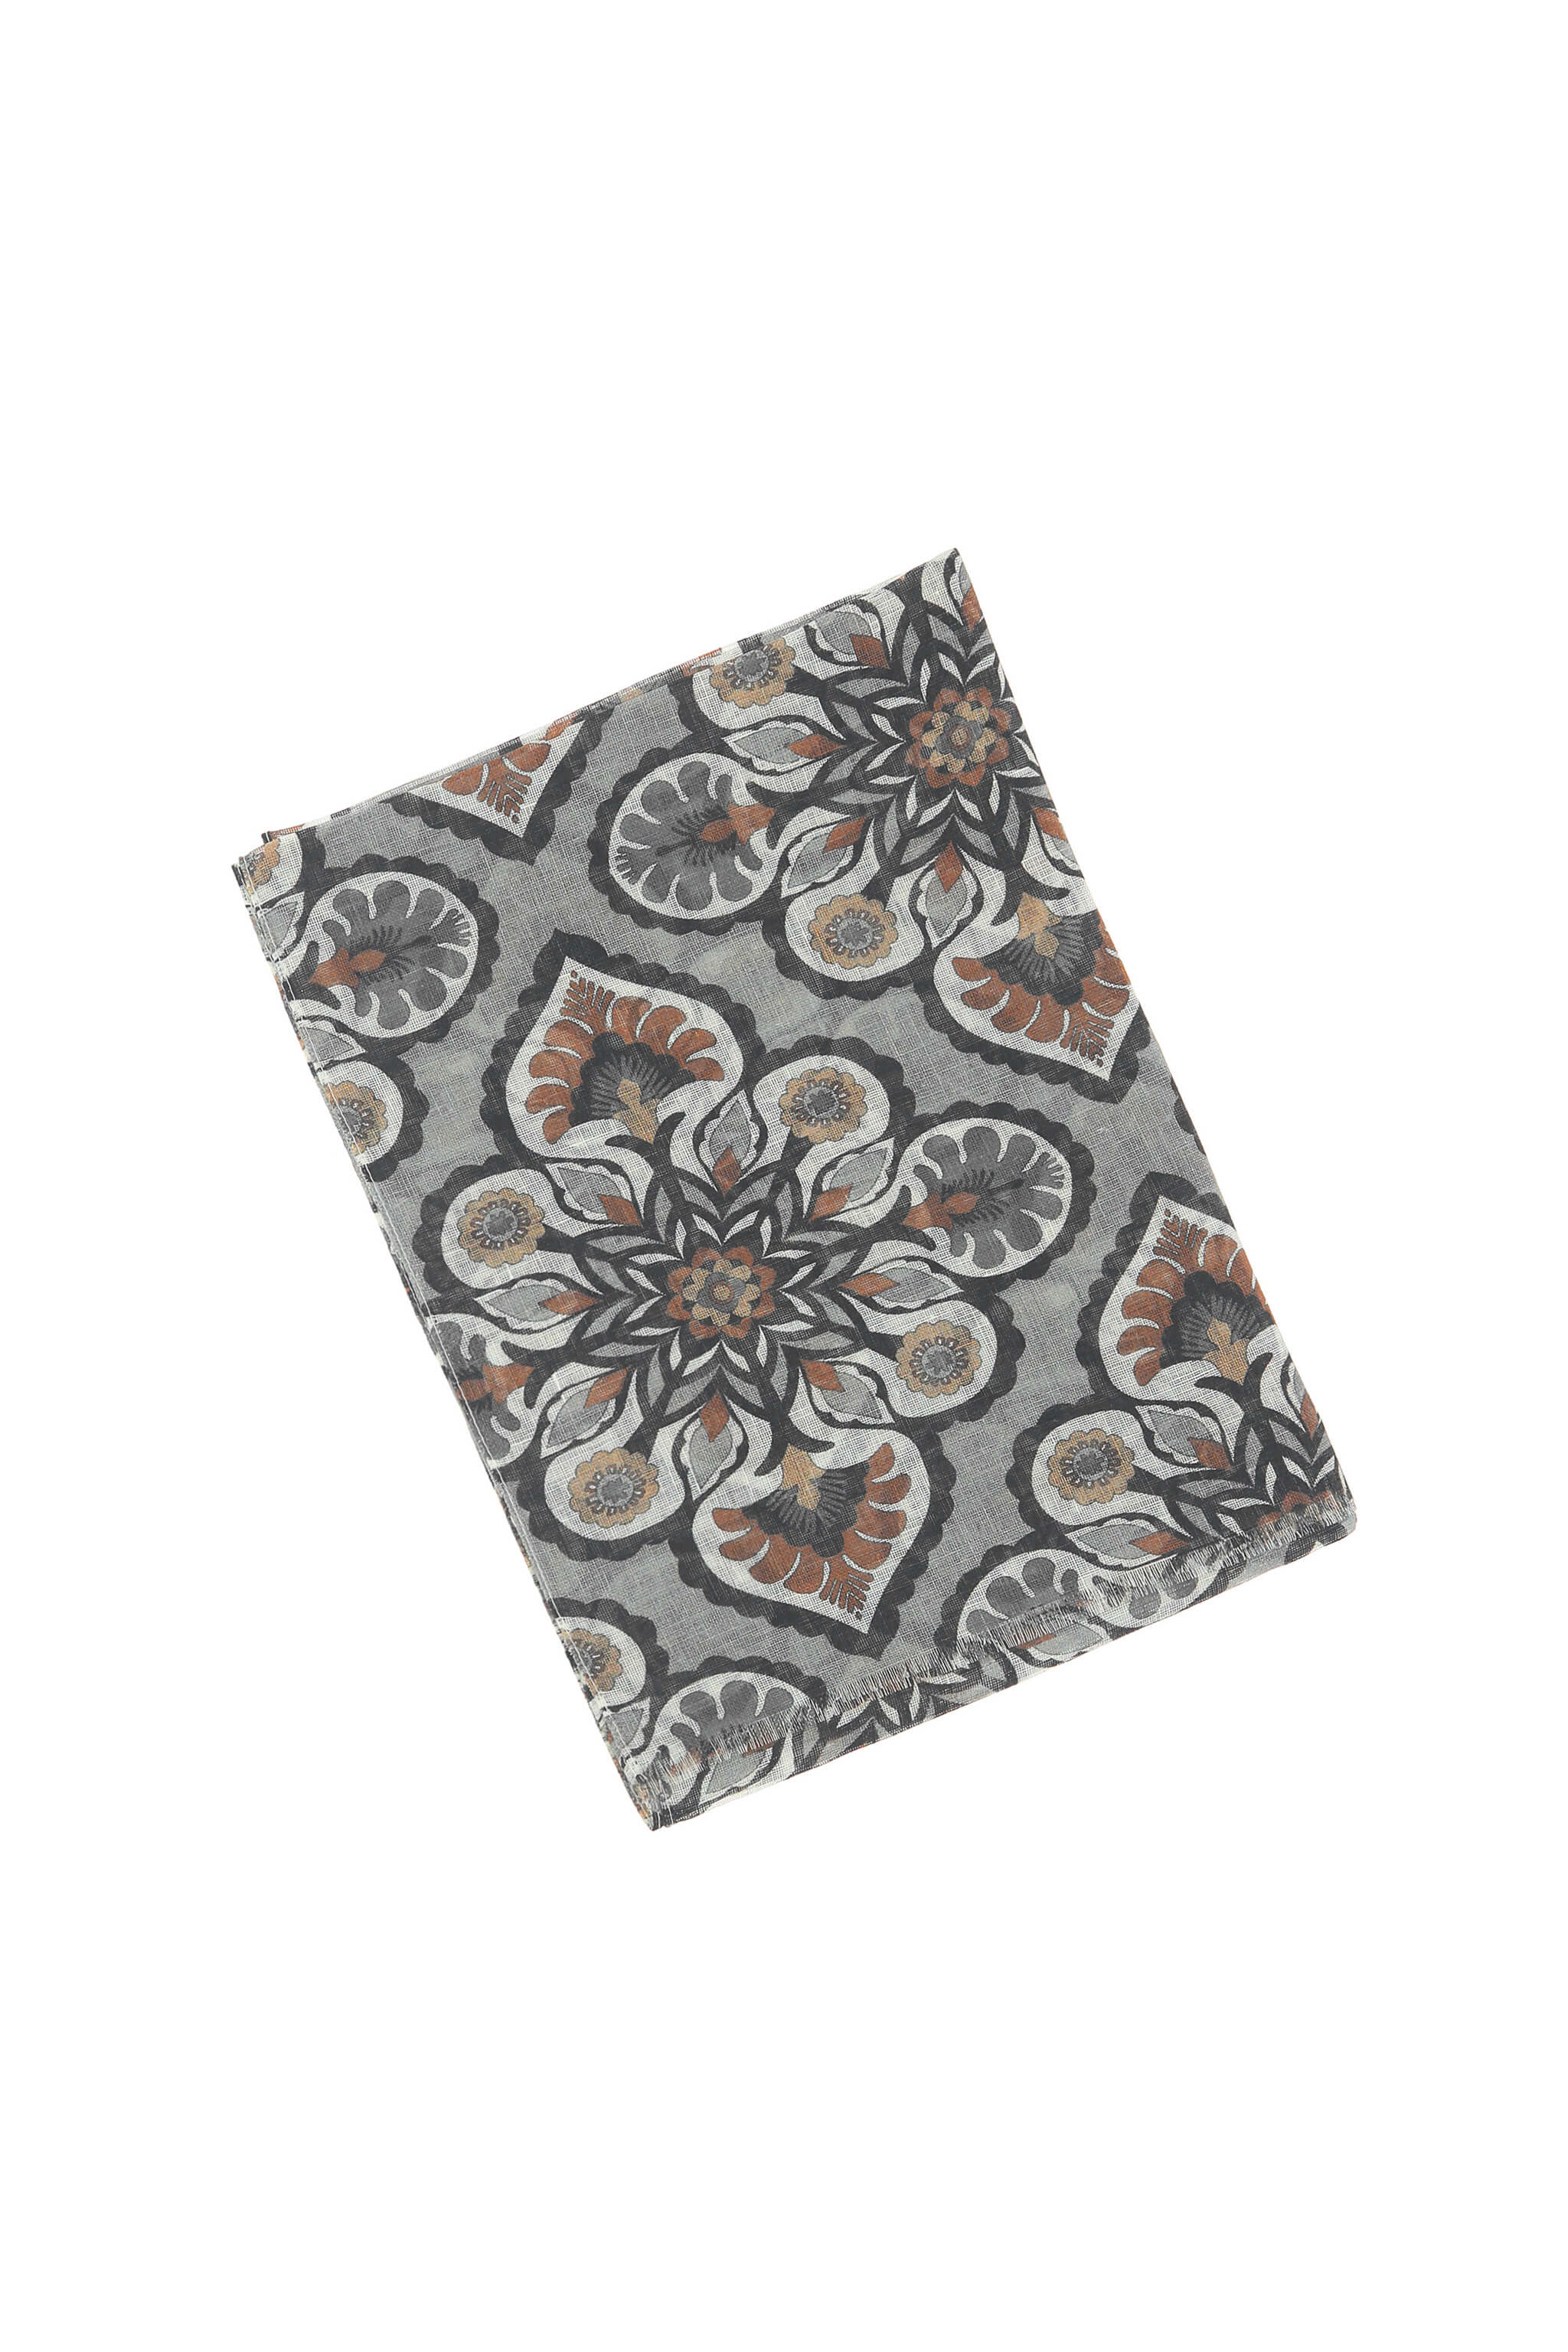 Floral print scarf in Gray